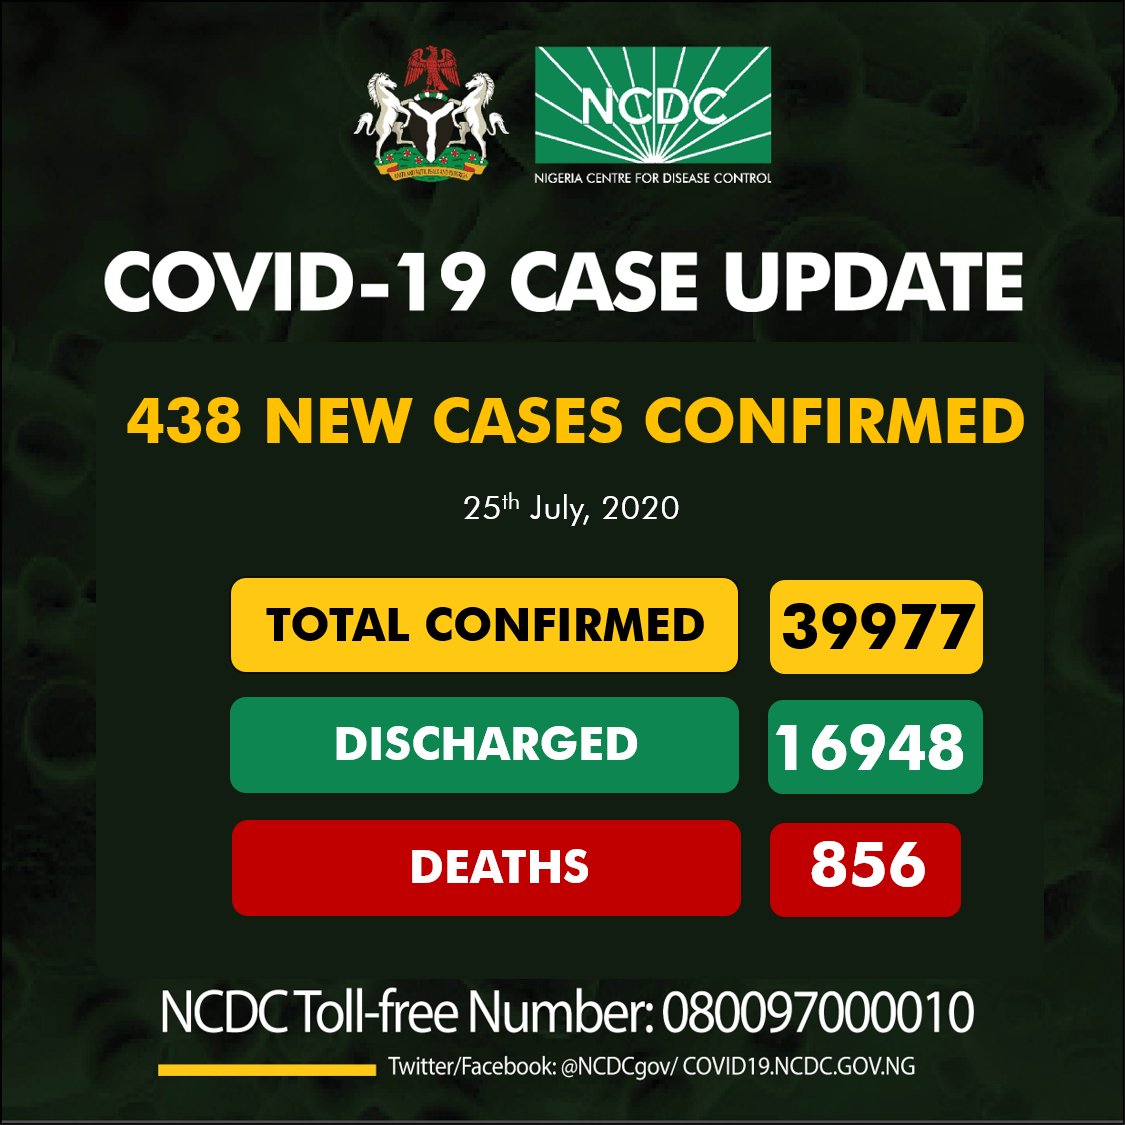 In Nigeria, COVID-19 cases have continued to rise, with more than 500 daily infections, pushing the total caseload above 39 thousand as at July 25, 2020, while more than 800 people have died as a result of complications from the virus.